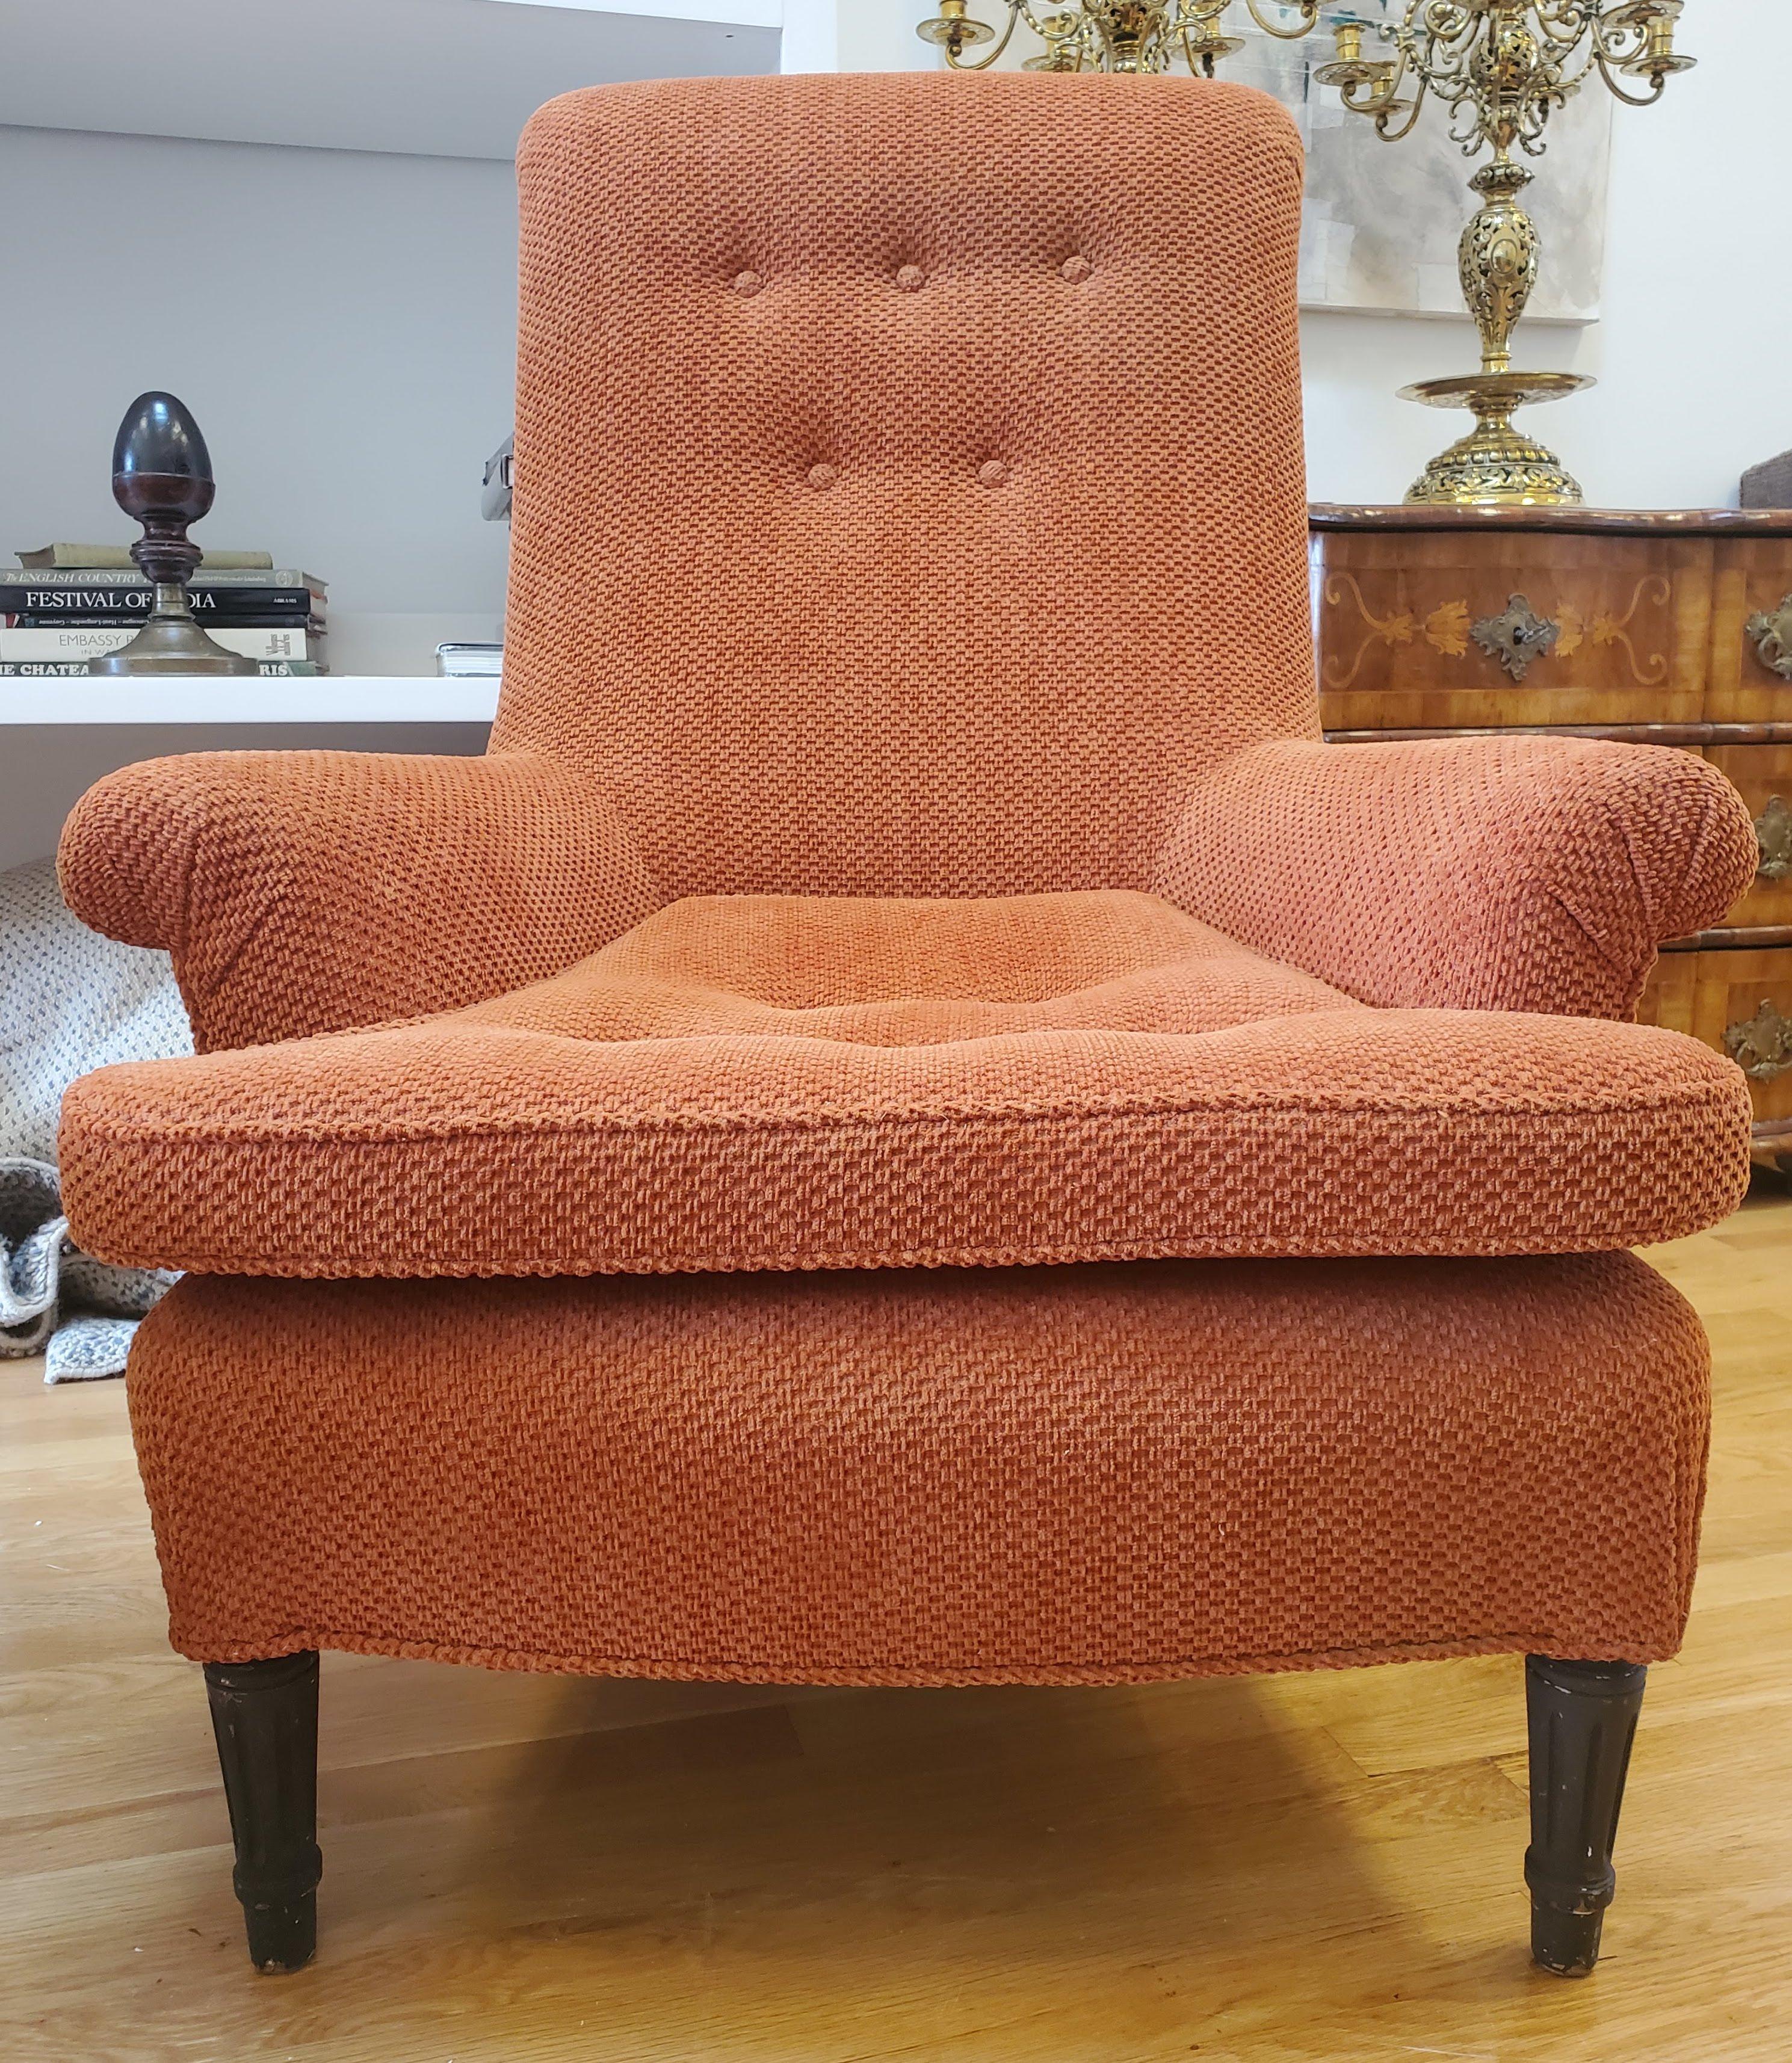 Pair of 19th Century English Club Chairs with Orange Chenille Upholstery For Sale 6